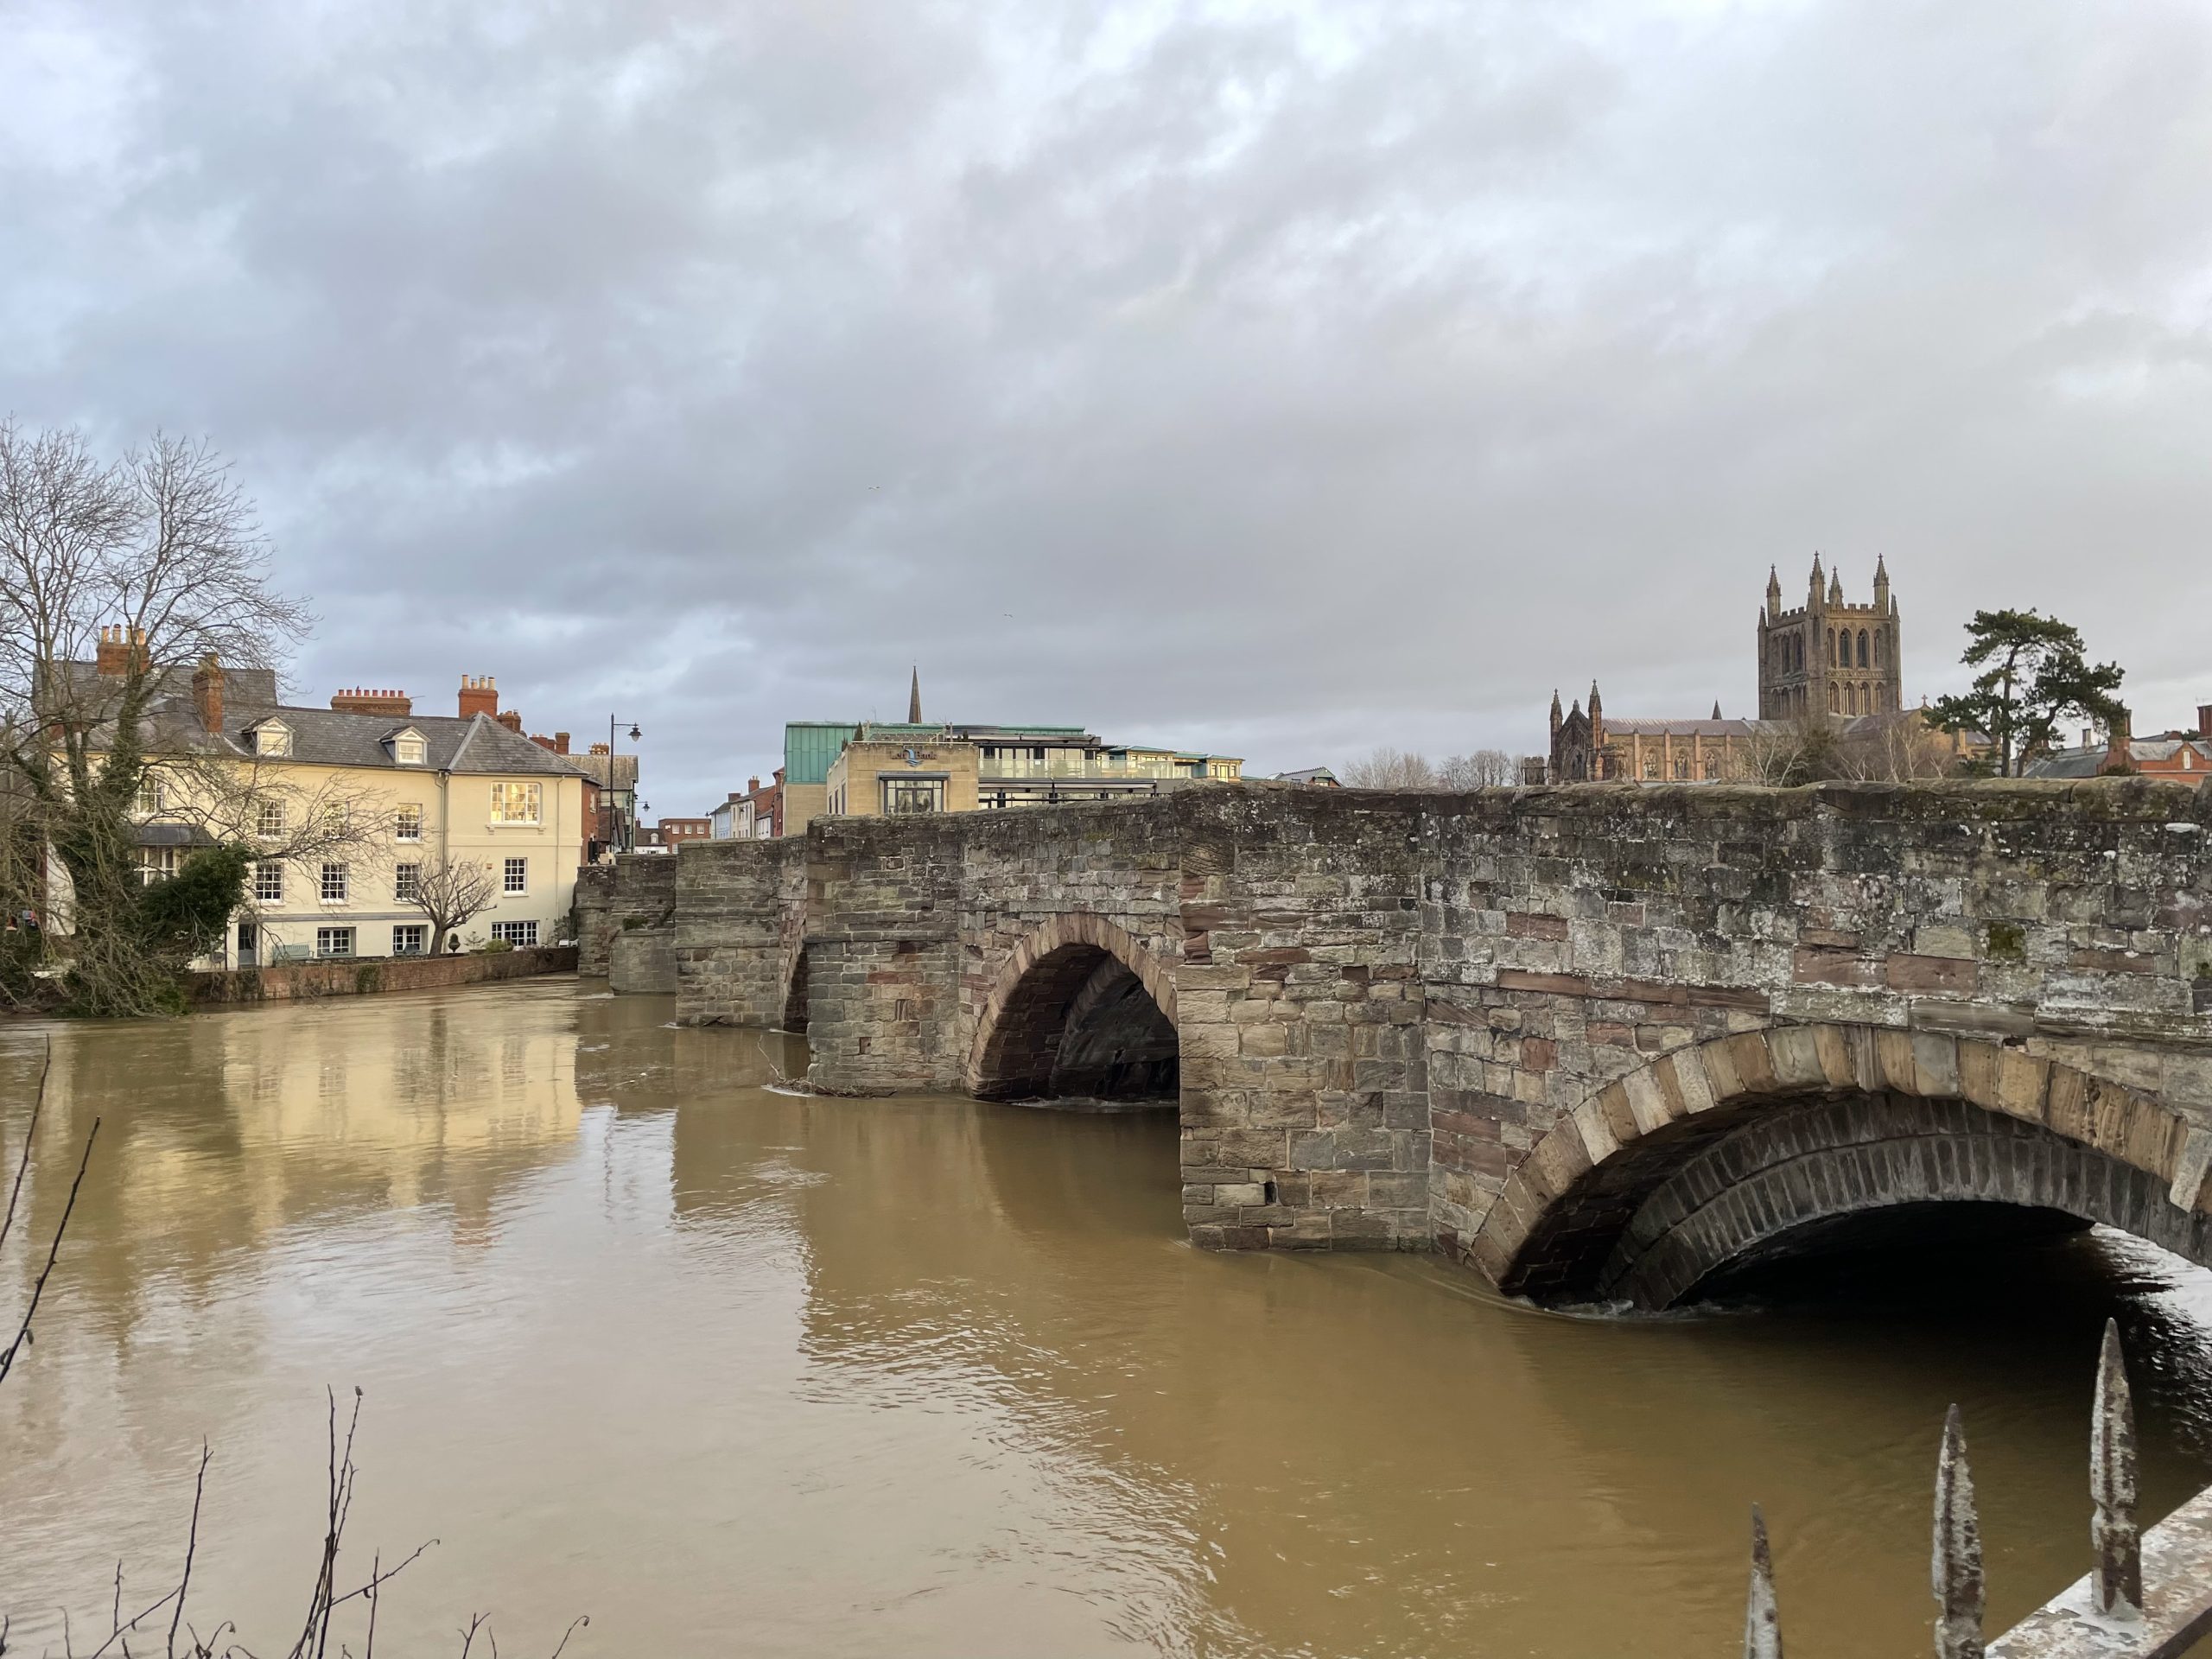 NEWS | Residents on the banks of the Wye warned to BE PREPARED with the Wye expected to peak at around 5.5 metres in Hereford tomorrow